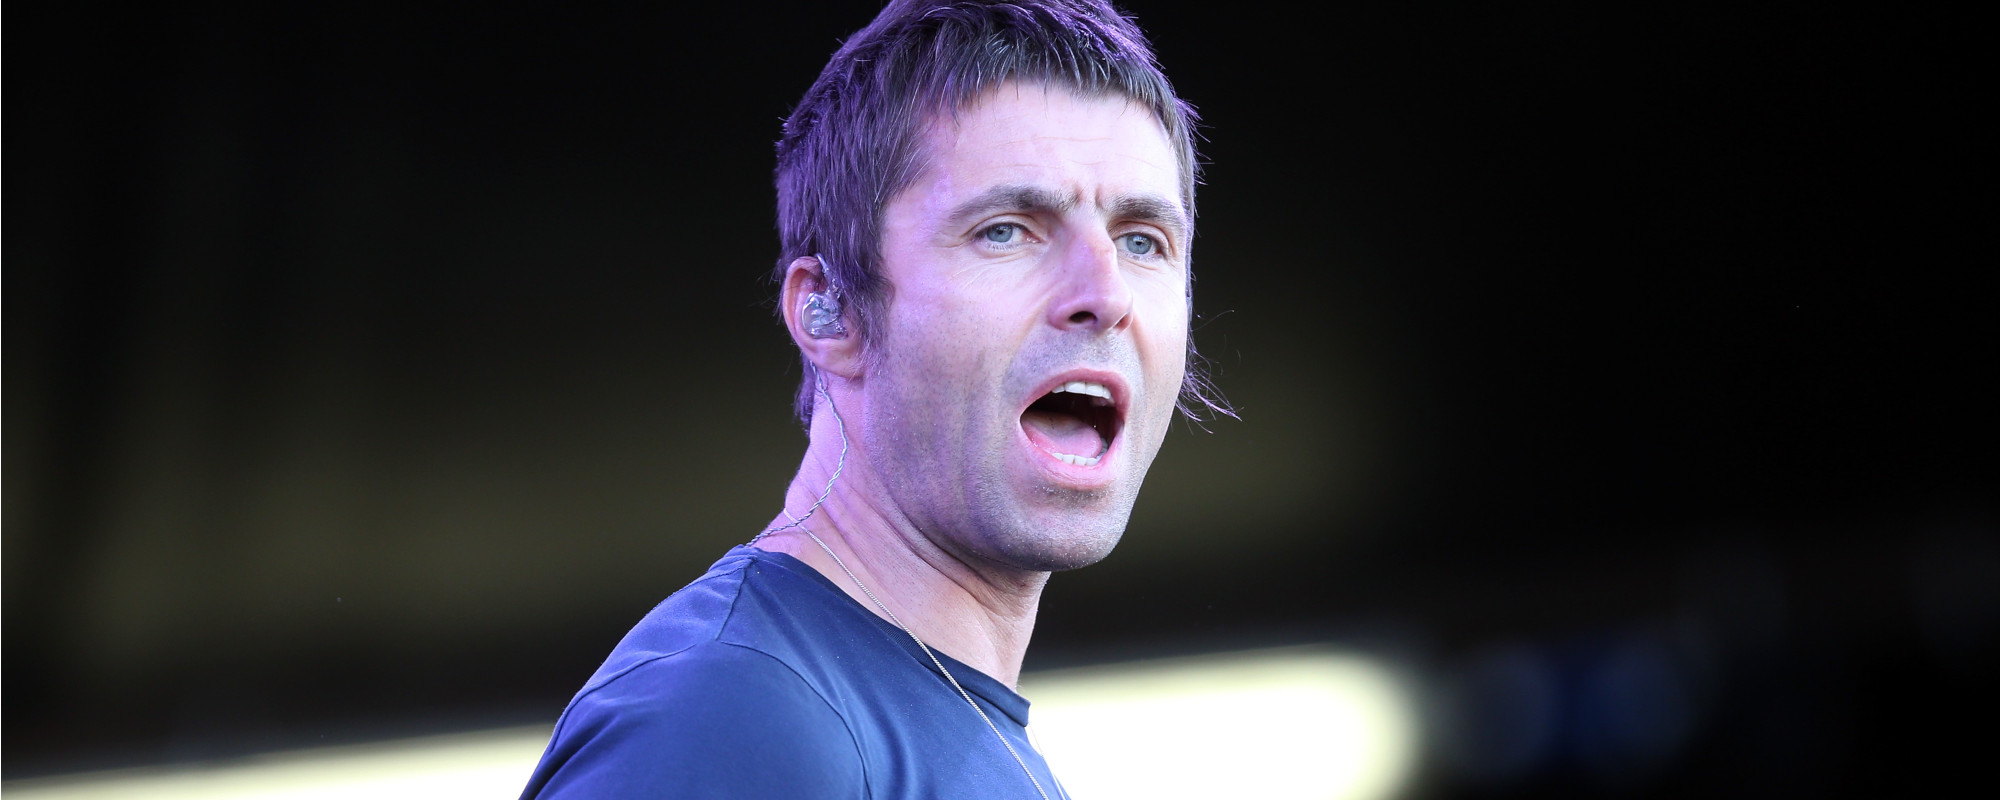 Liam Gallagher Calls Out Rock & Roll Hall of Fame: “As Much as I Love Mariah Carey, Do Me a Favour And F--k Off”